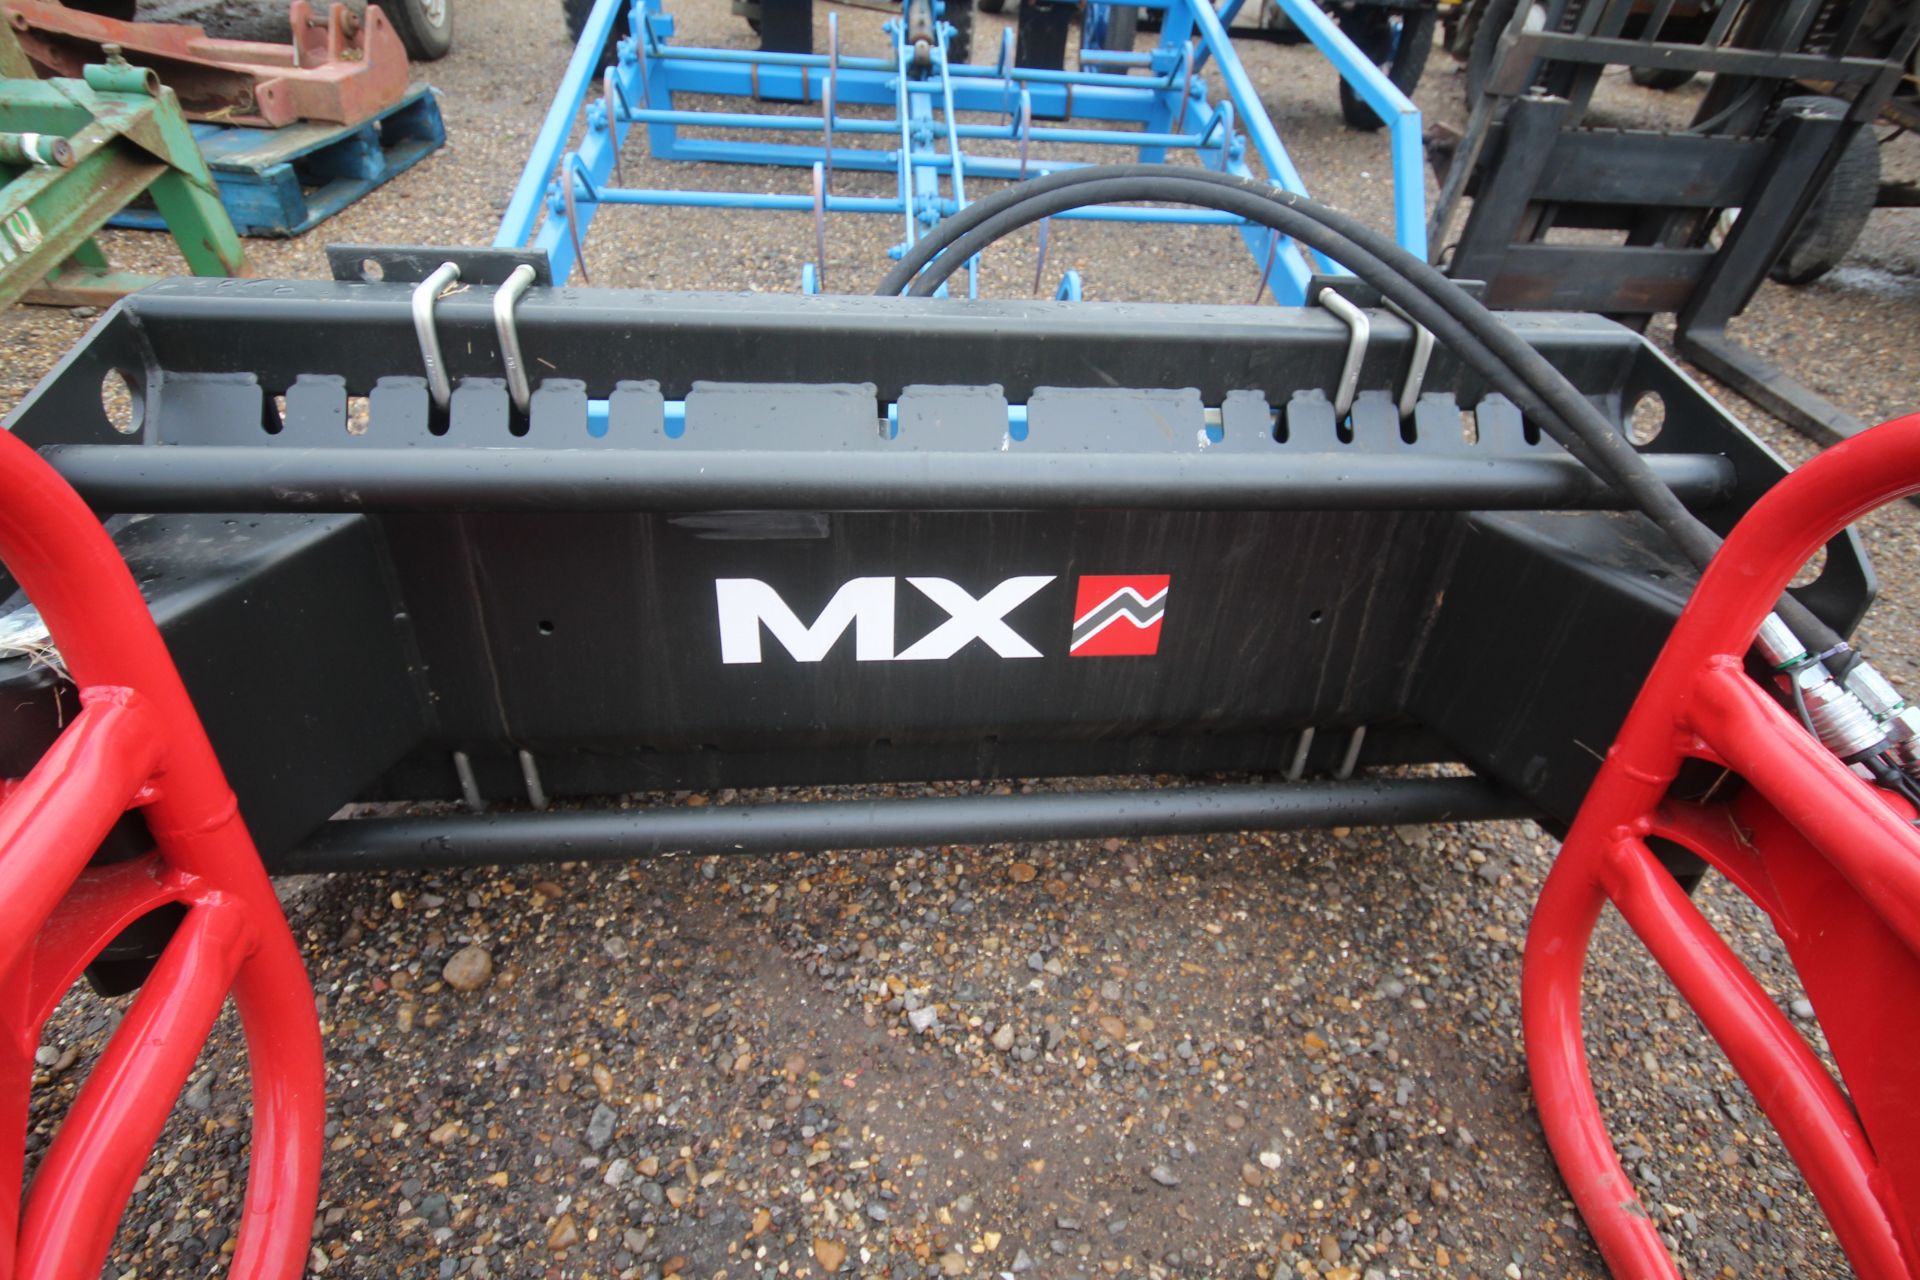 MX Manubal C40 bale squeeze. 2022. Euro 8 brackets. Owned from new. For sale due to retirement. V - Image 13 of 15